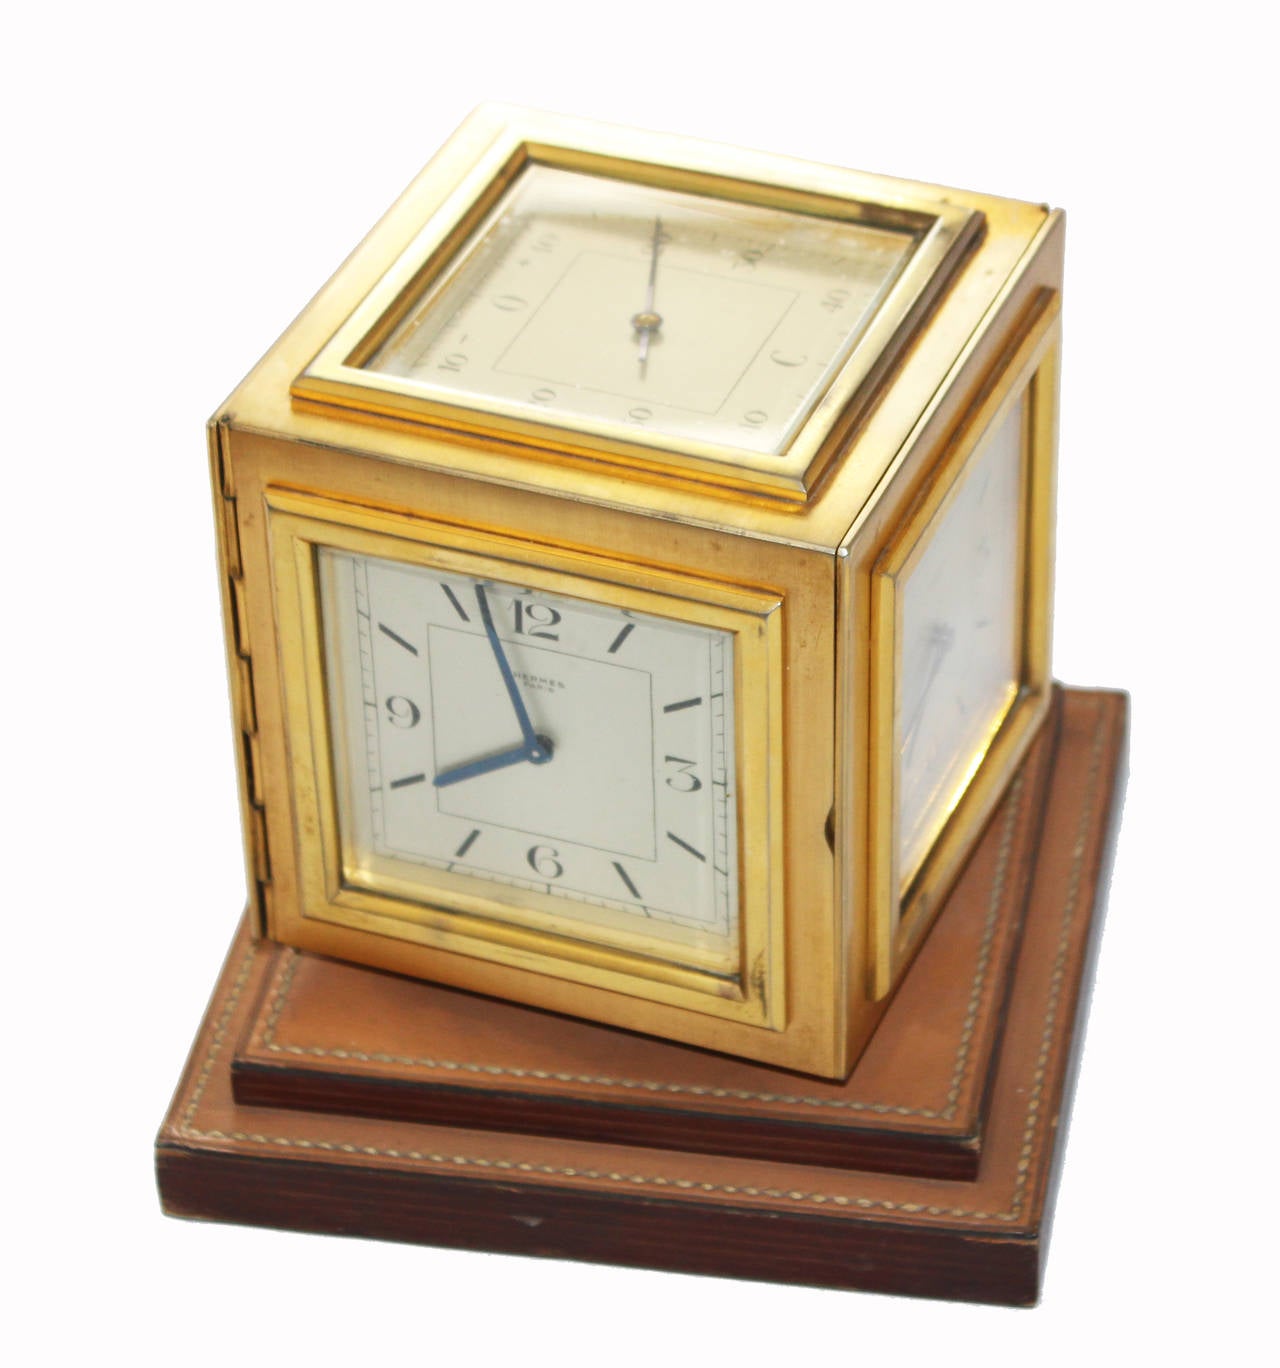 Exceptional Hermès Clock cubic desktop 5-sided golden brass, c. 1950. Thermometer on the window above. Mechanical movement. Two side access hatches in control of the mechanism. Base with stepped lamella superposed pitting cowhide. Sand color. Size: